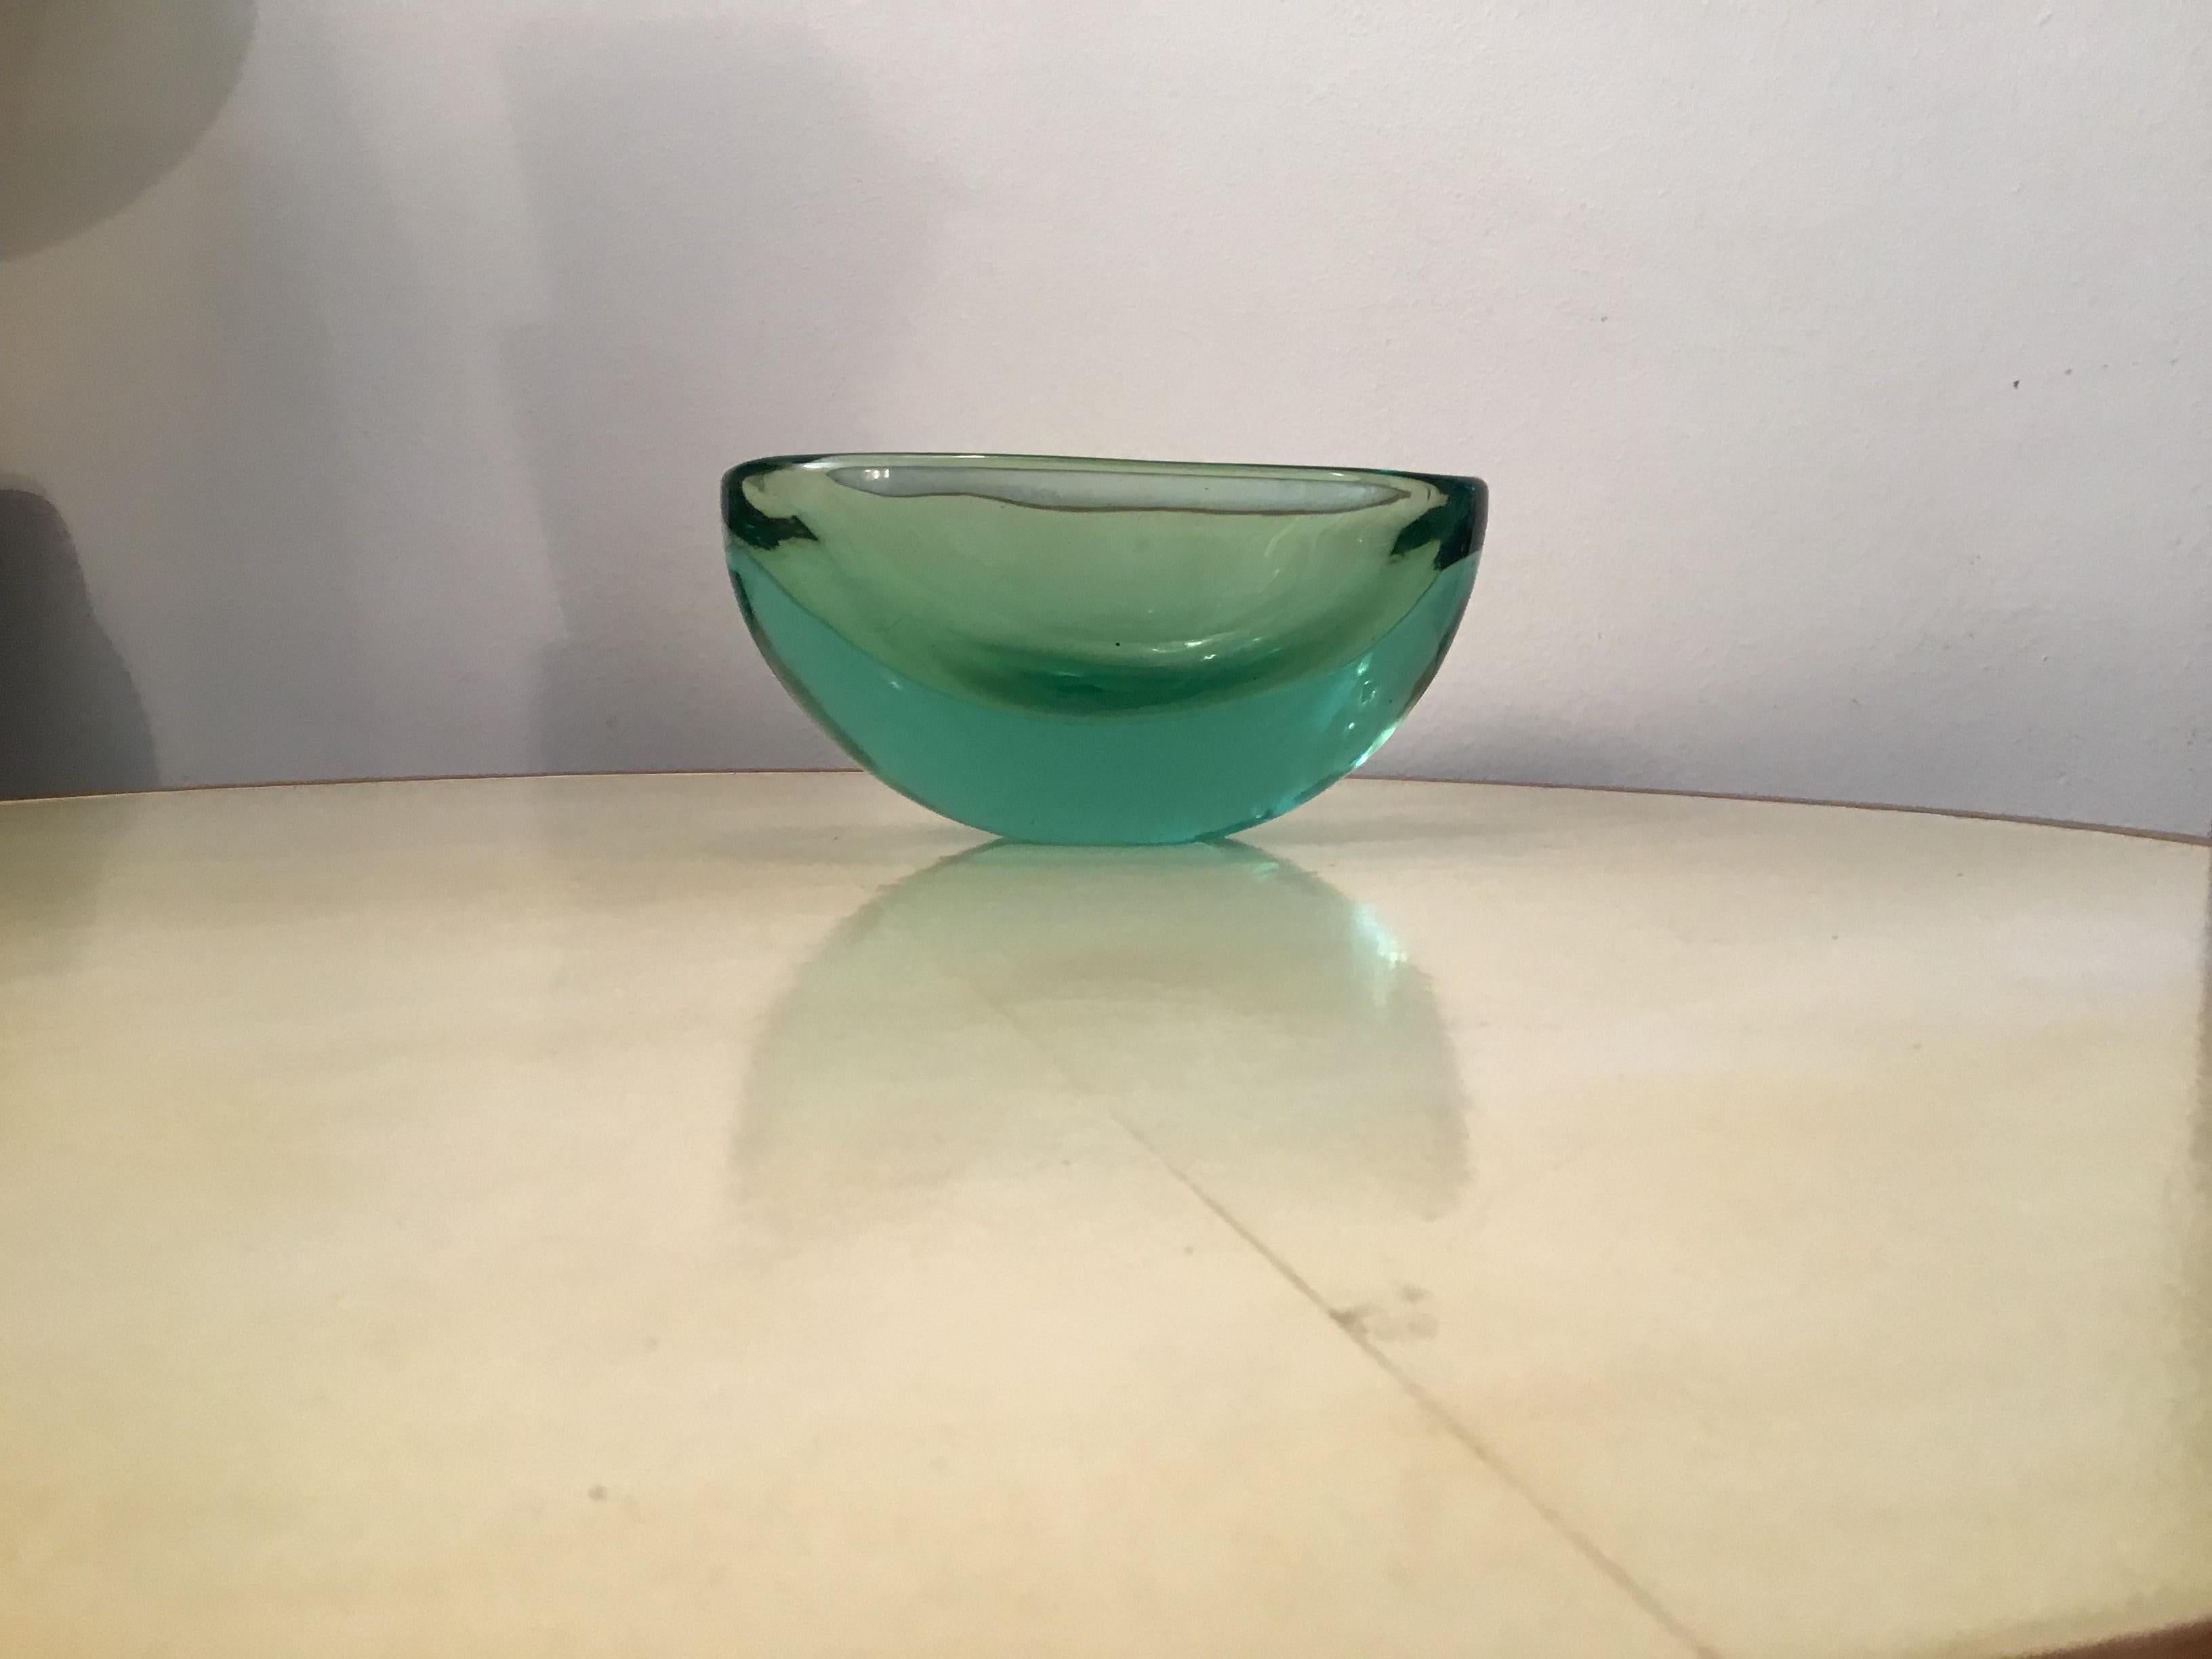 Archimede Seguso Oval Bowl, Green Submerged Glass Centrepiece, 1950 For Sale 4